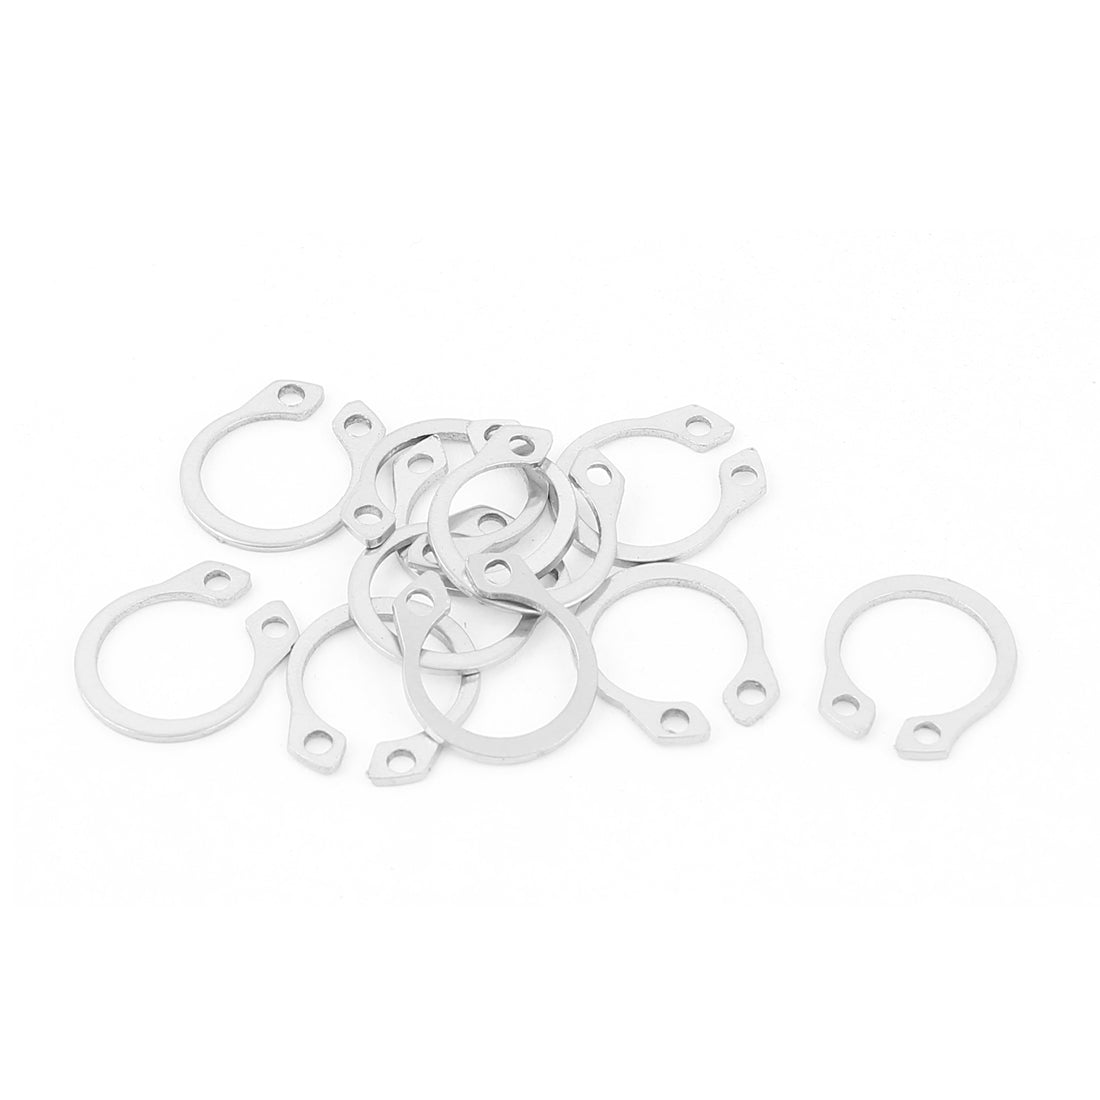 uxcell Uxcell 10pcs 304 Stainless Steel External Circlip Retaining Shaft Snap Rings 12mm